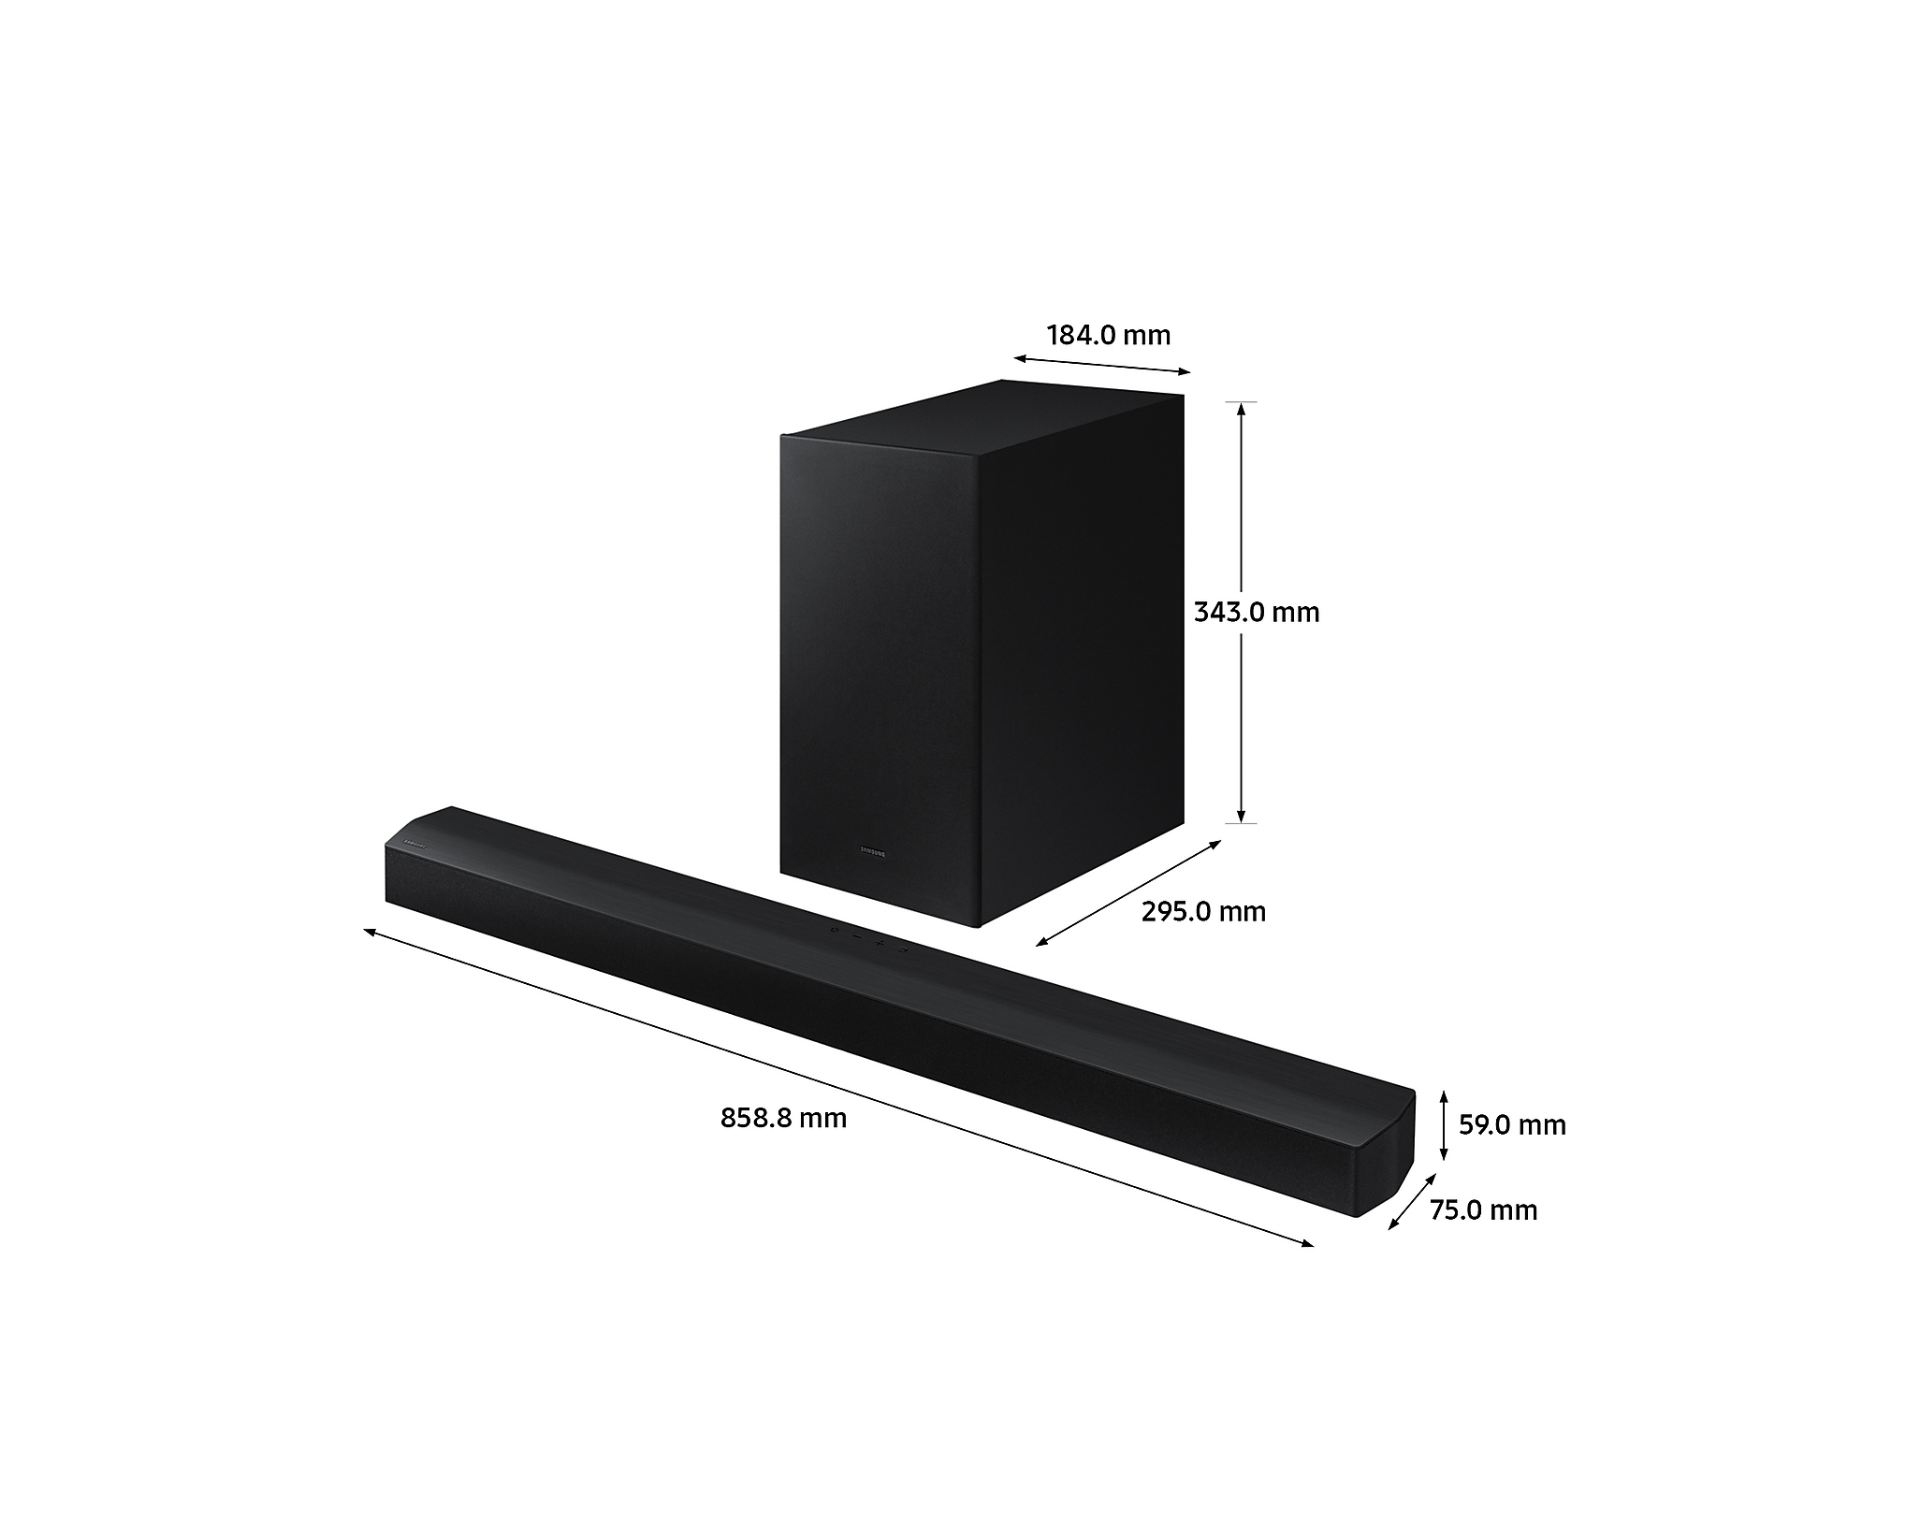 SAMSUNG HW-B430 BLUETOOTH 2.1 SOUNDBAR AND WIRELESS SUBWOOFER IN BLACK - RRP £199 - Image 2 of 13